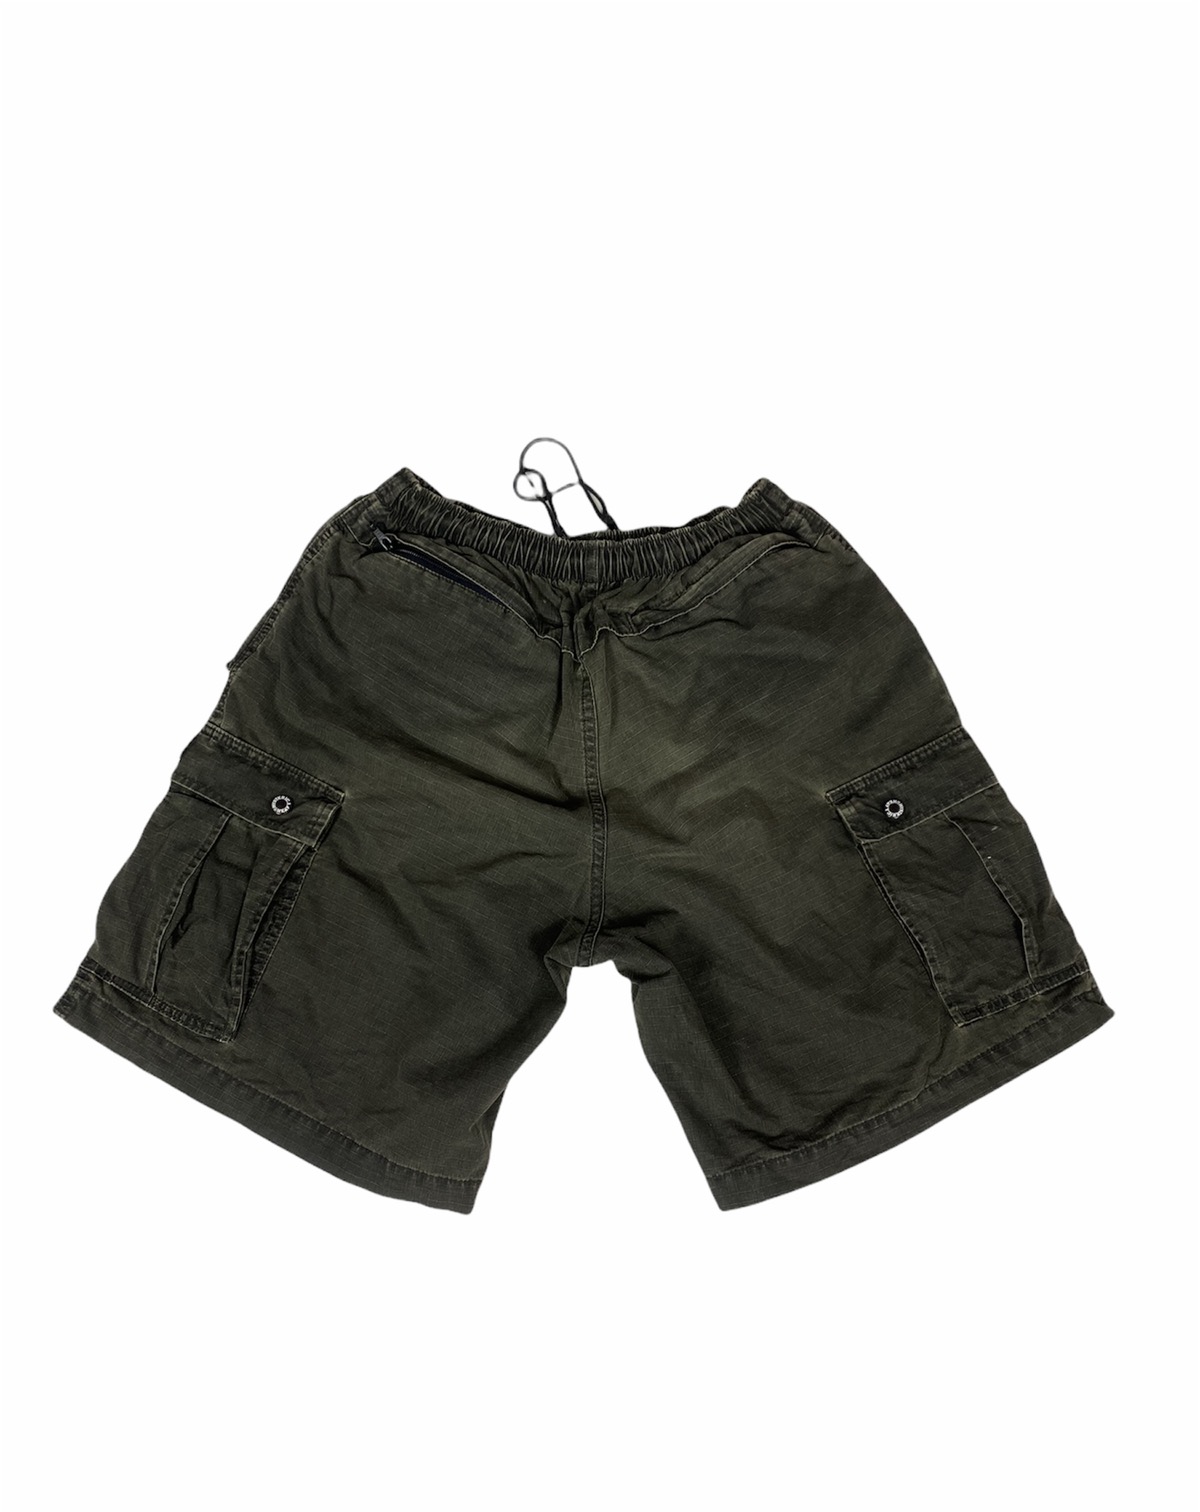 Vintage Hysteric Glamour Cargo Shortpants. S0146 - 2